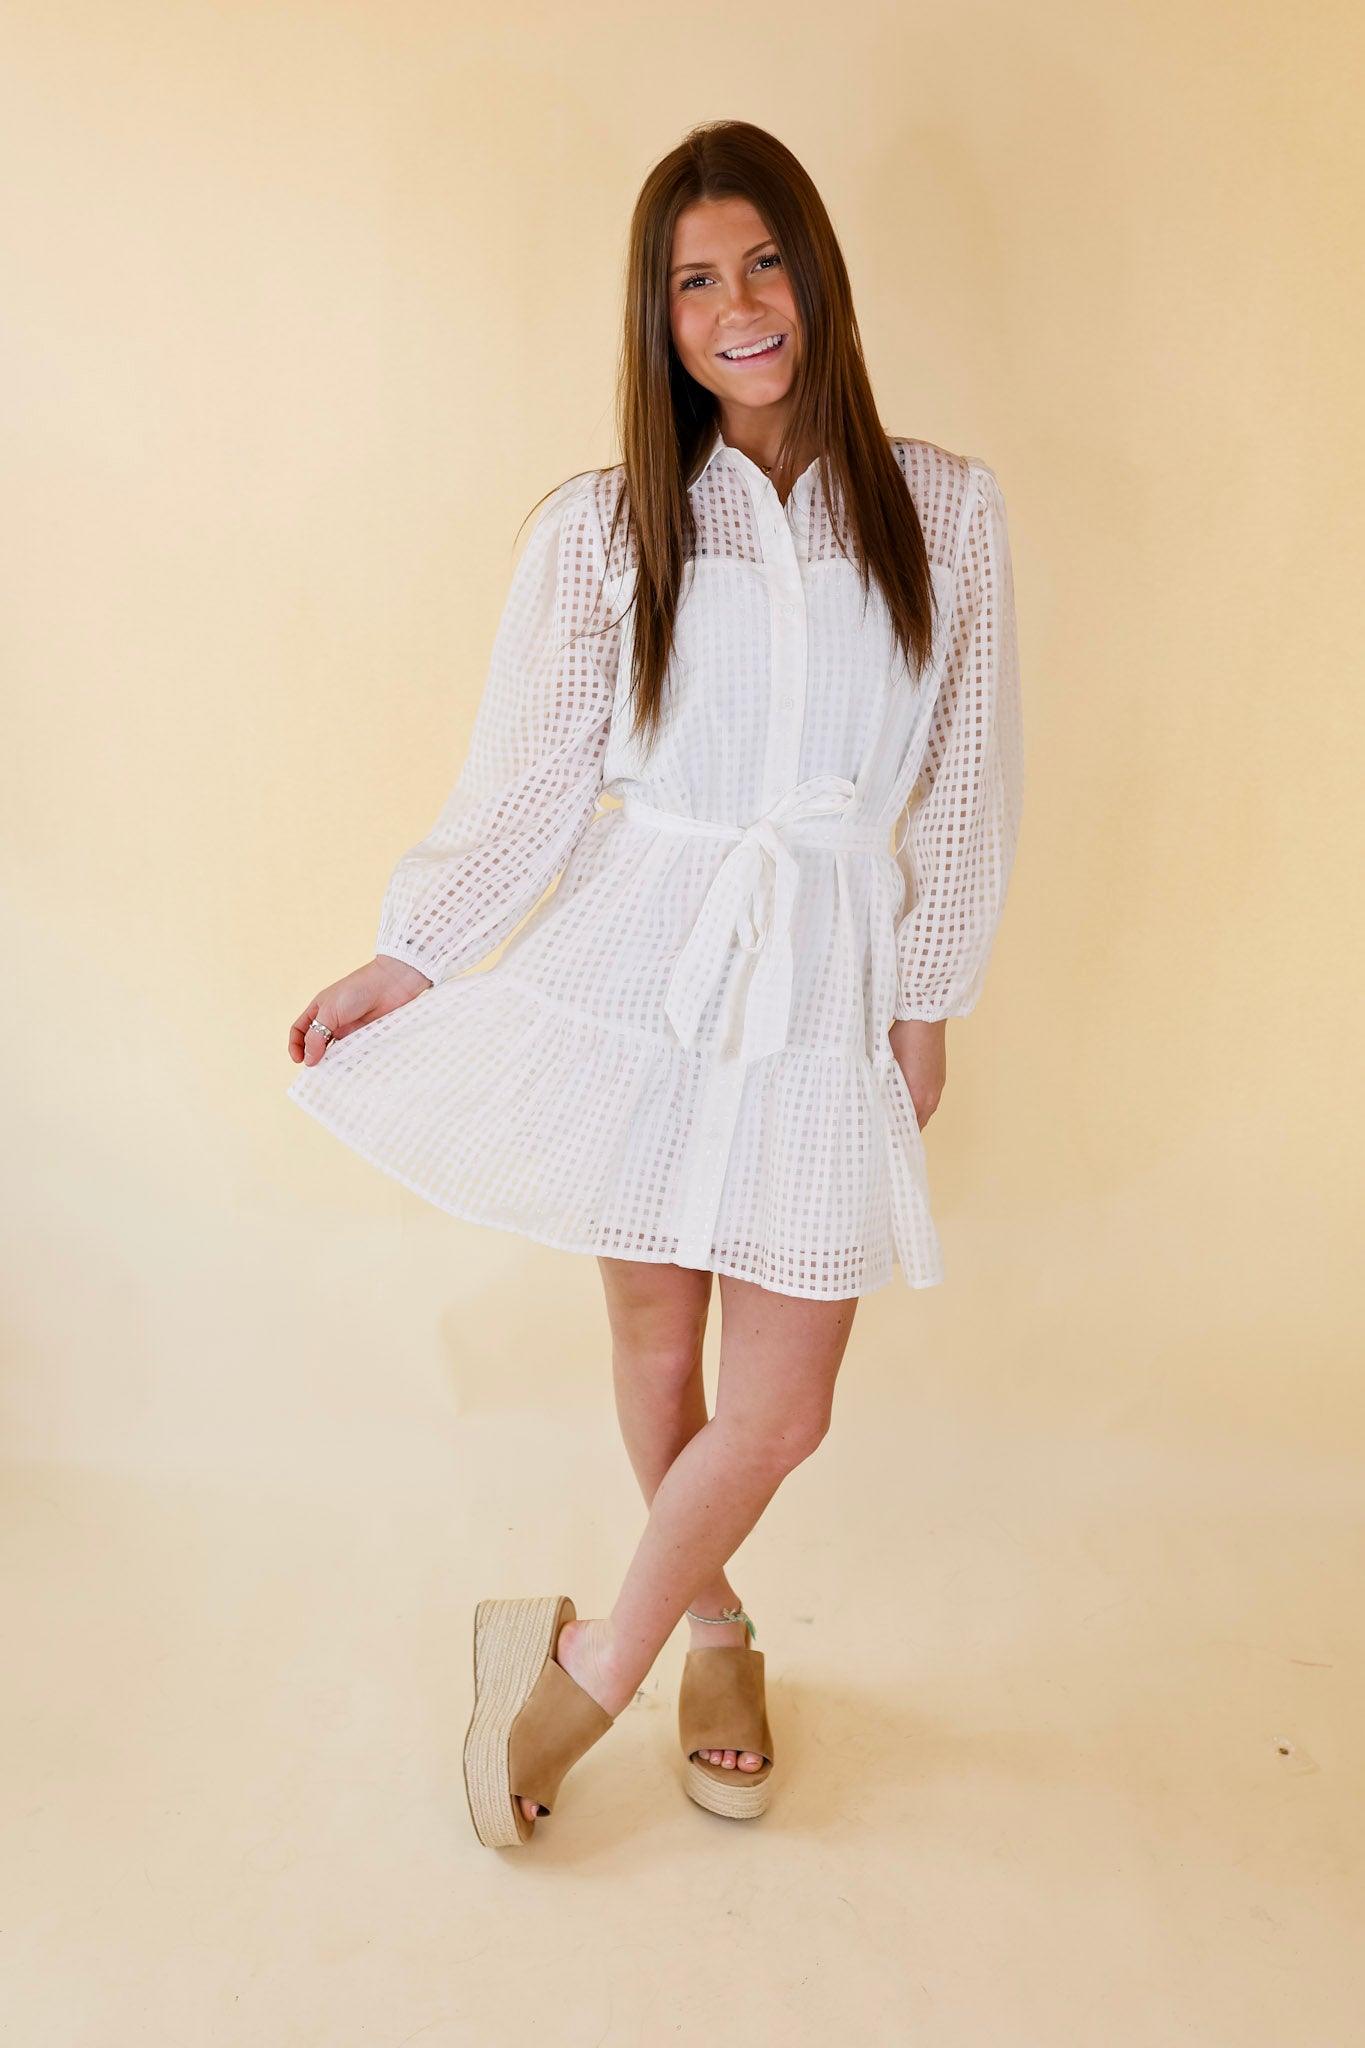 Fresh Air Sheer Gingham Print Button Up Dress in Ivory - Giddy Up Glamour Boutique